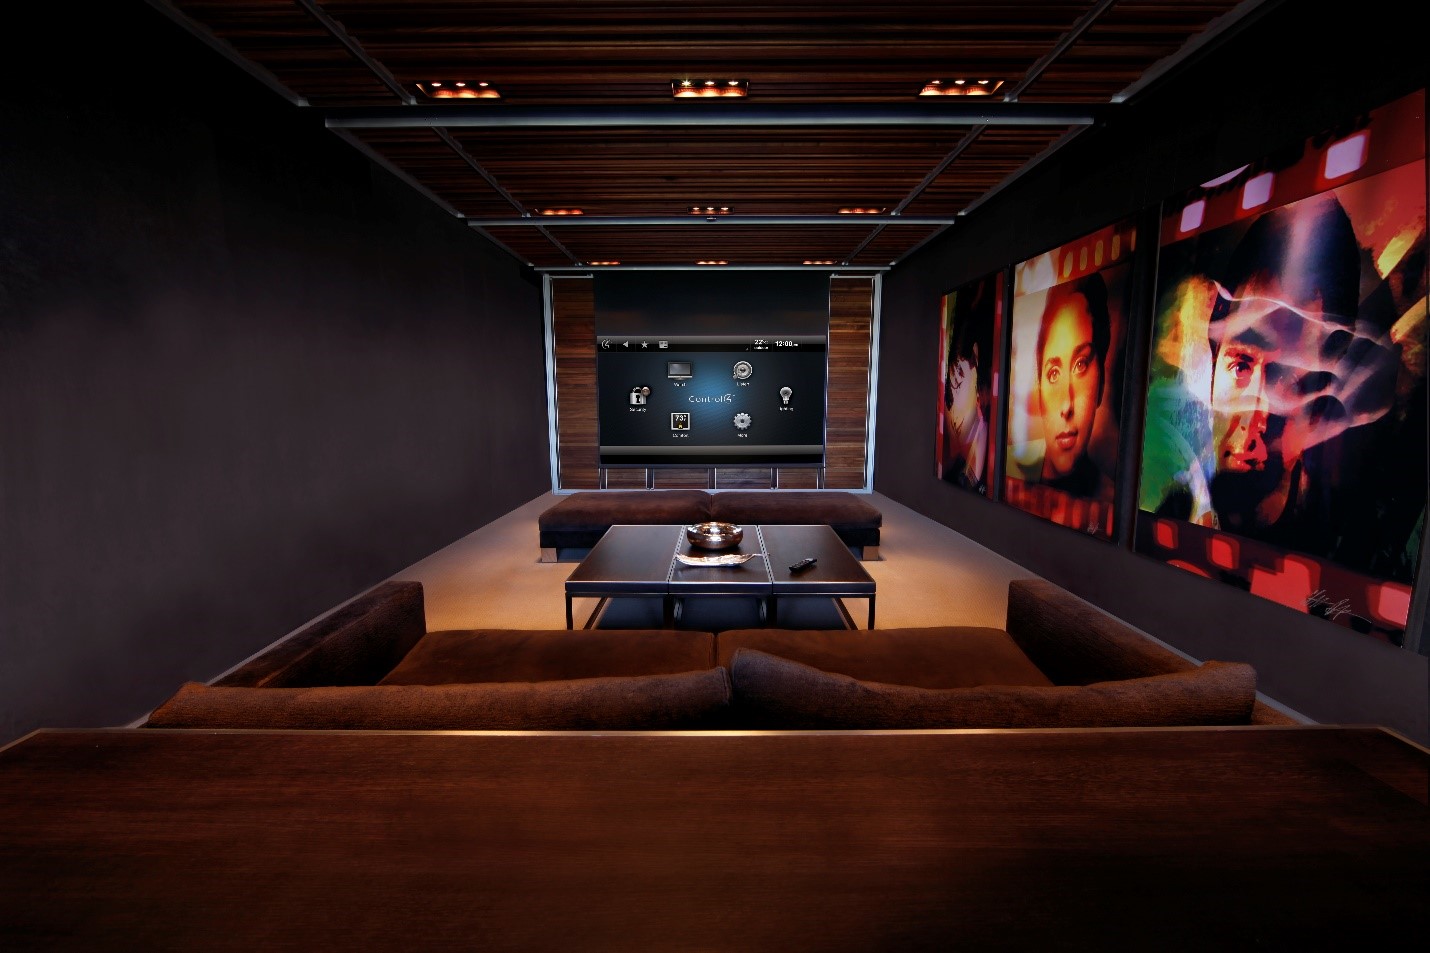 Audio-Video Products To Boost Your Home Theater Business